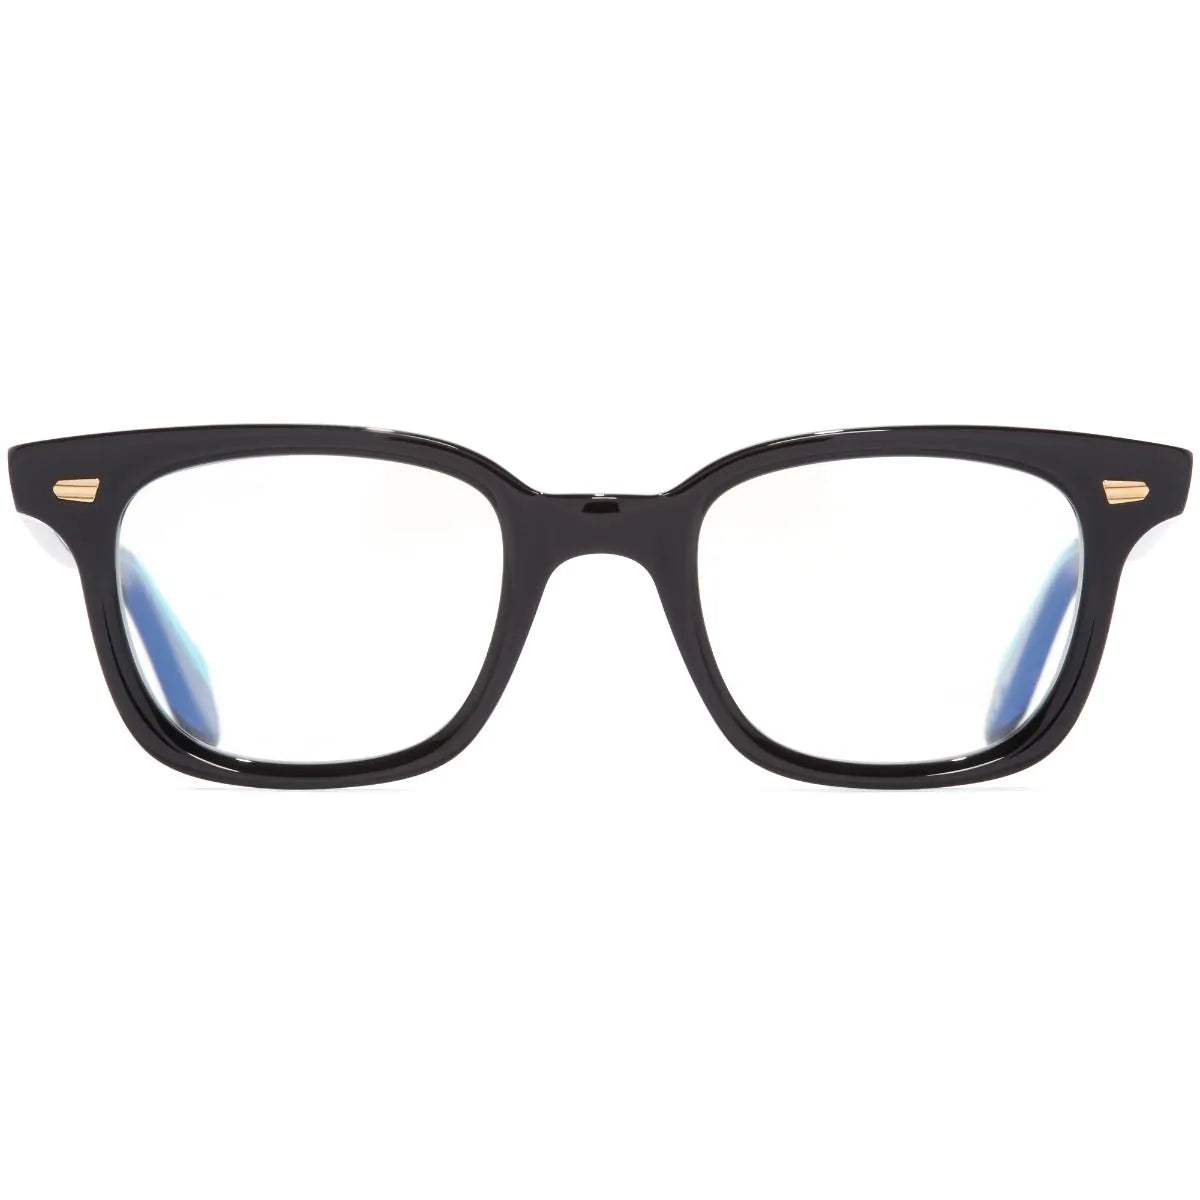 9521 Square Optical Glasses (Small) - Teal on Black by Cutler and Gross